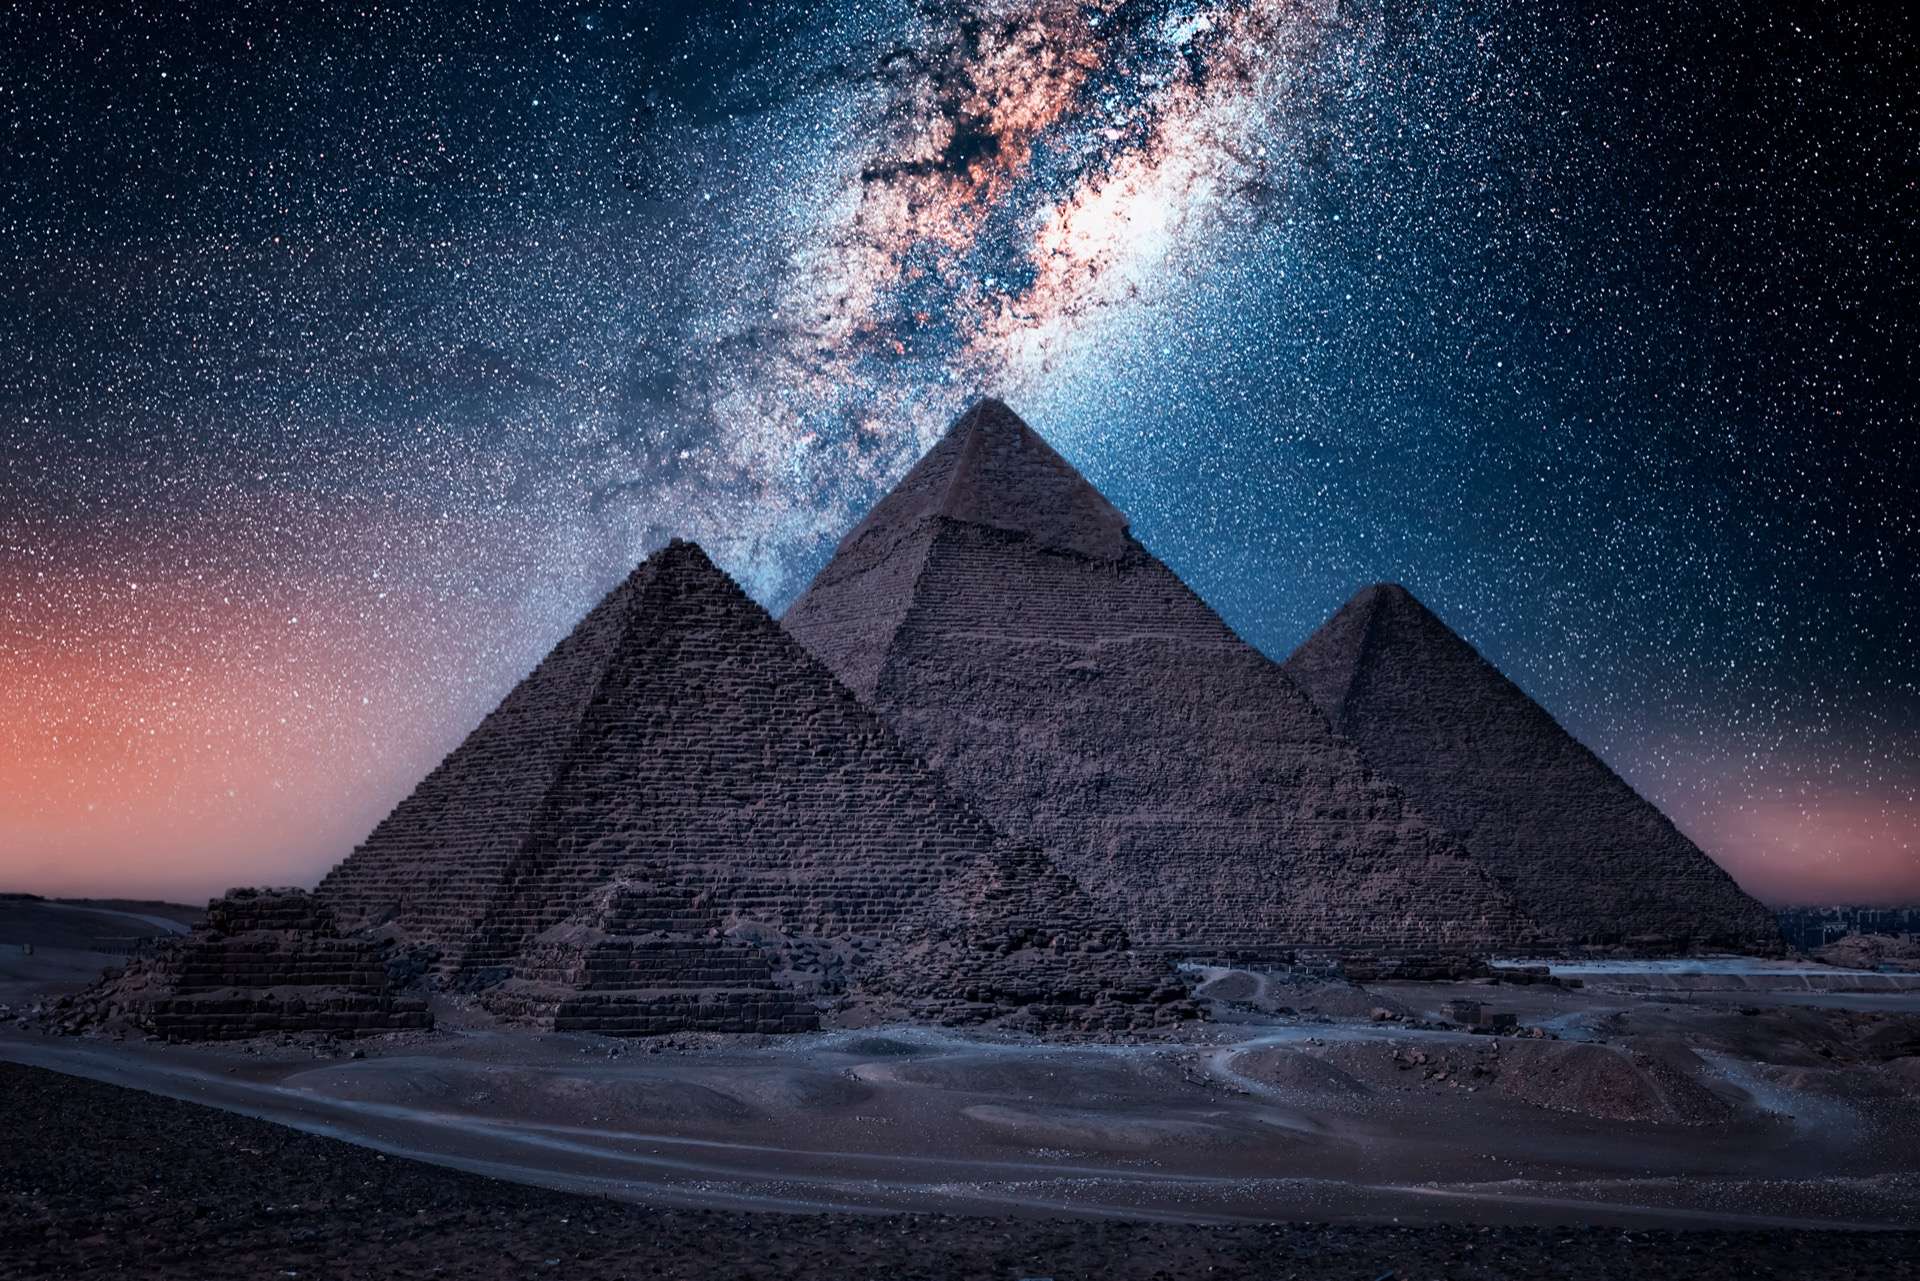 The Egyptians knew that iron could come from space!